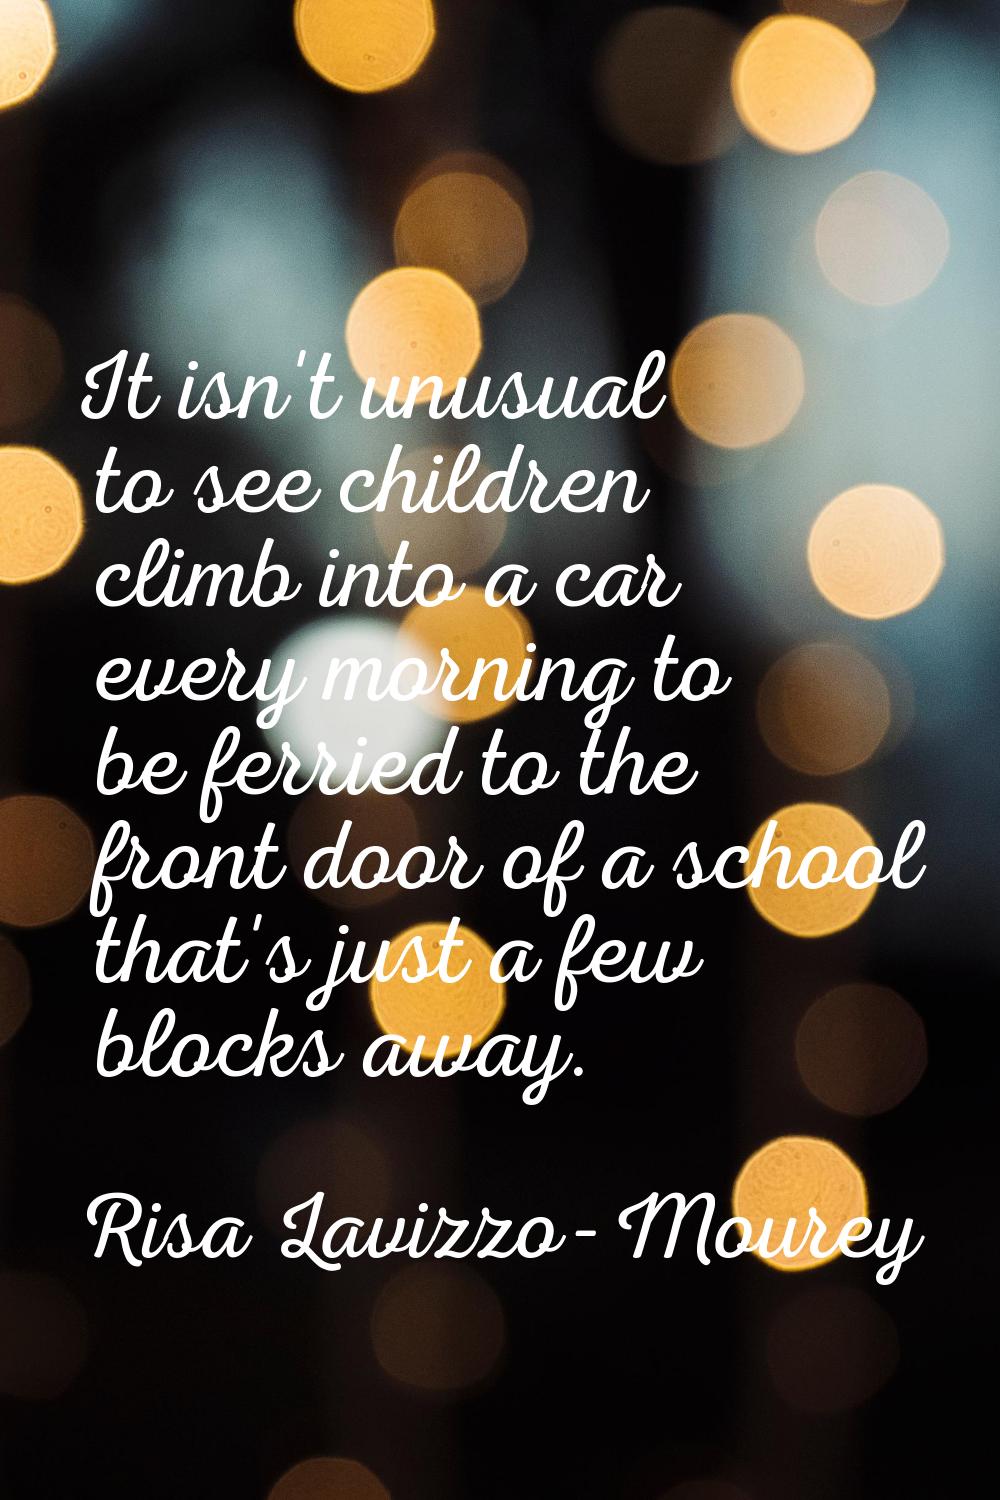 It isn't unusual to see children climb into a car every morning to be ferried to the front door of 